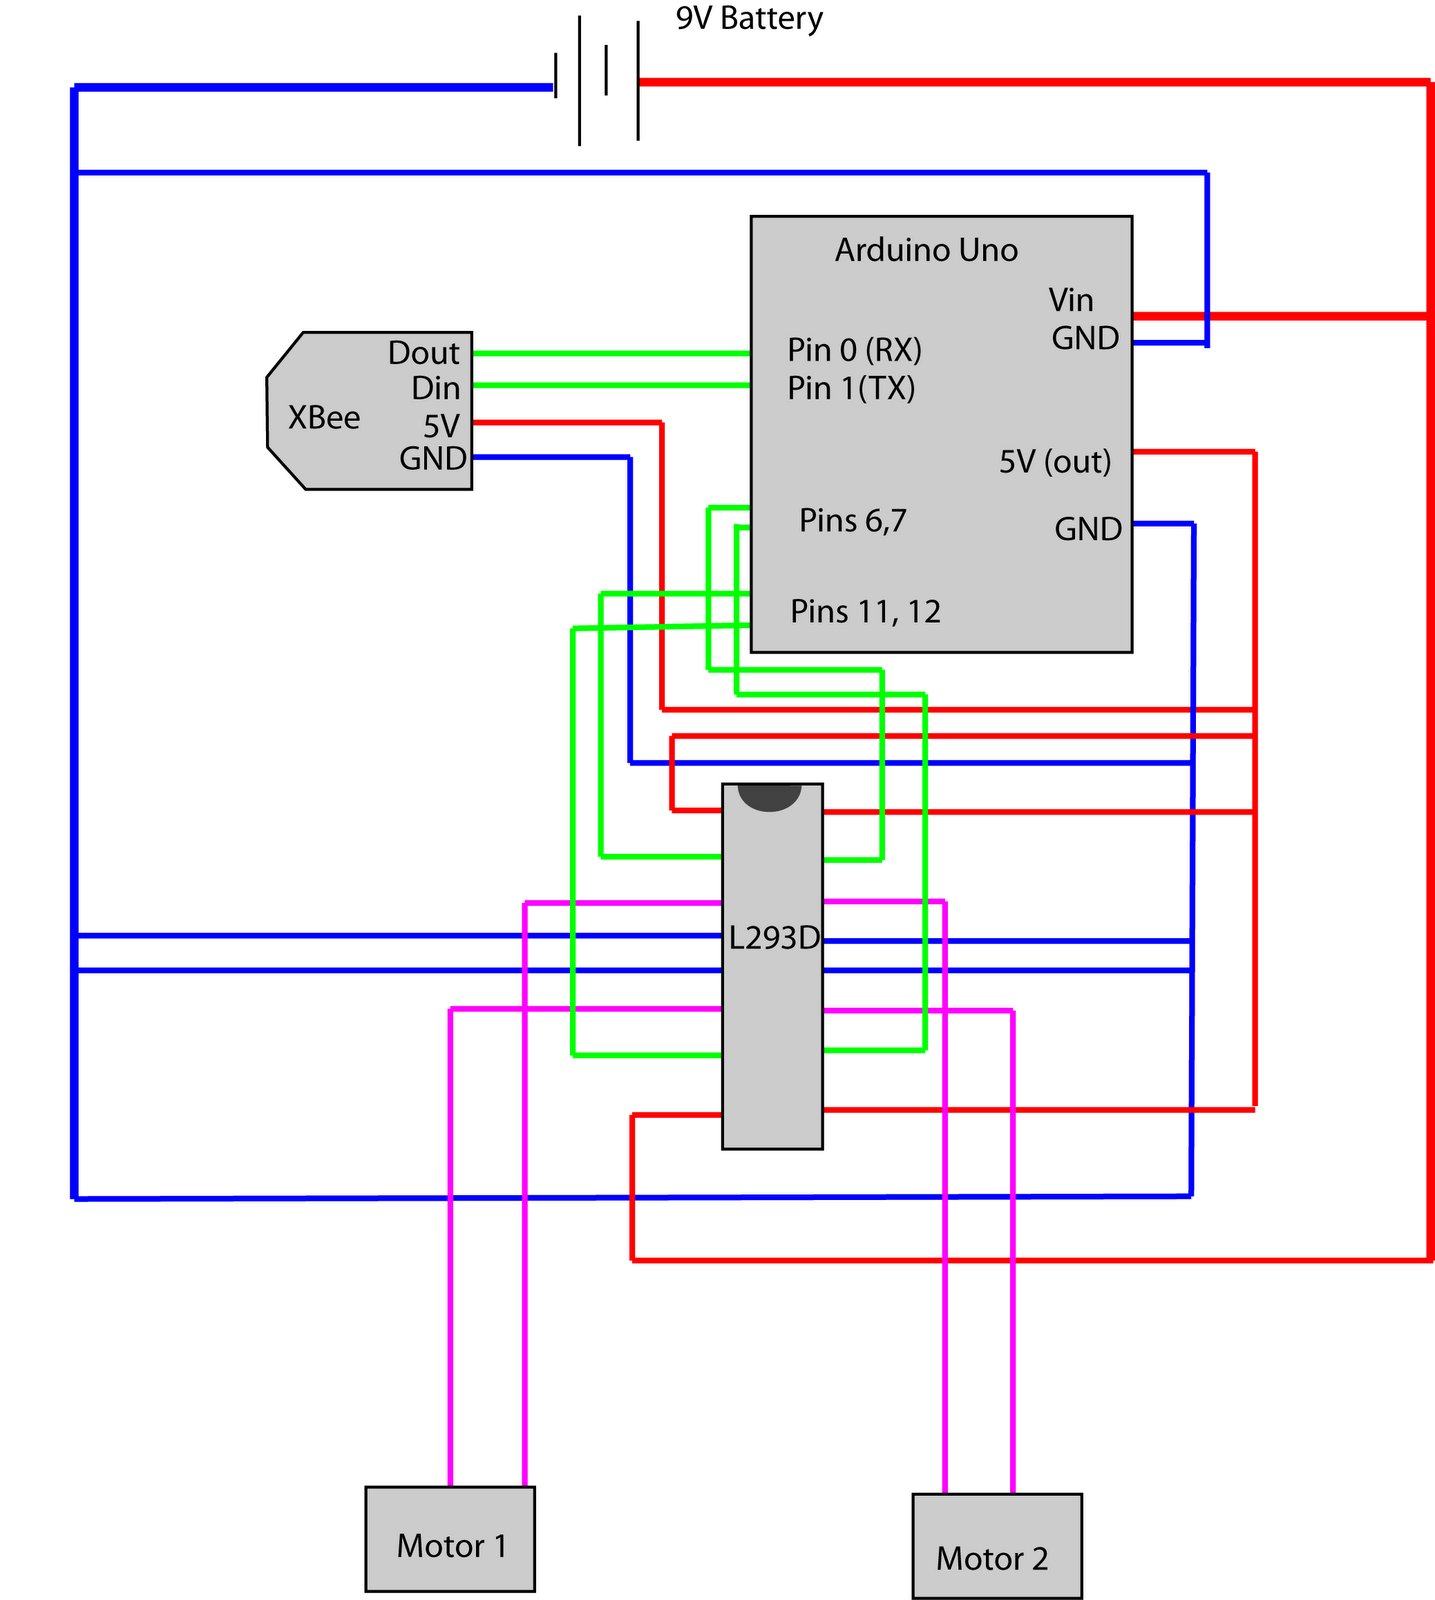 Philipp Dowling: Robot schematic and Arduino sketch